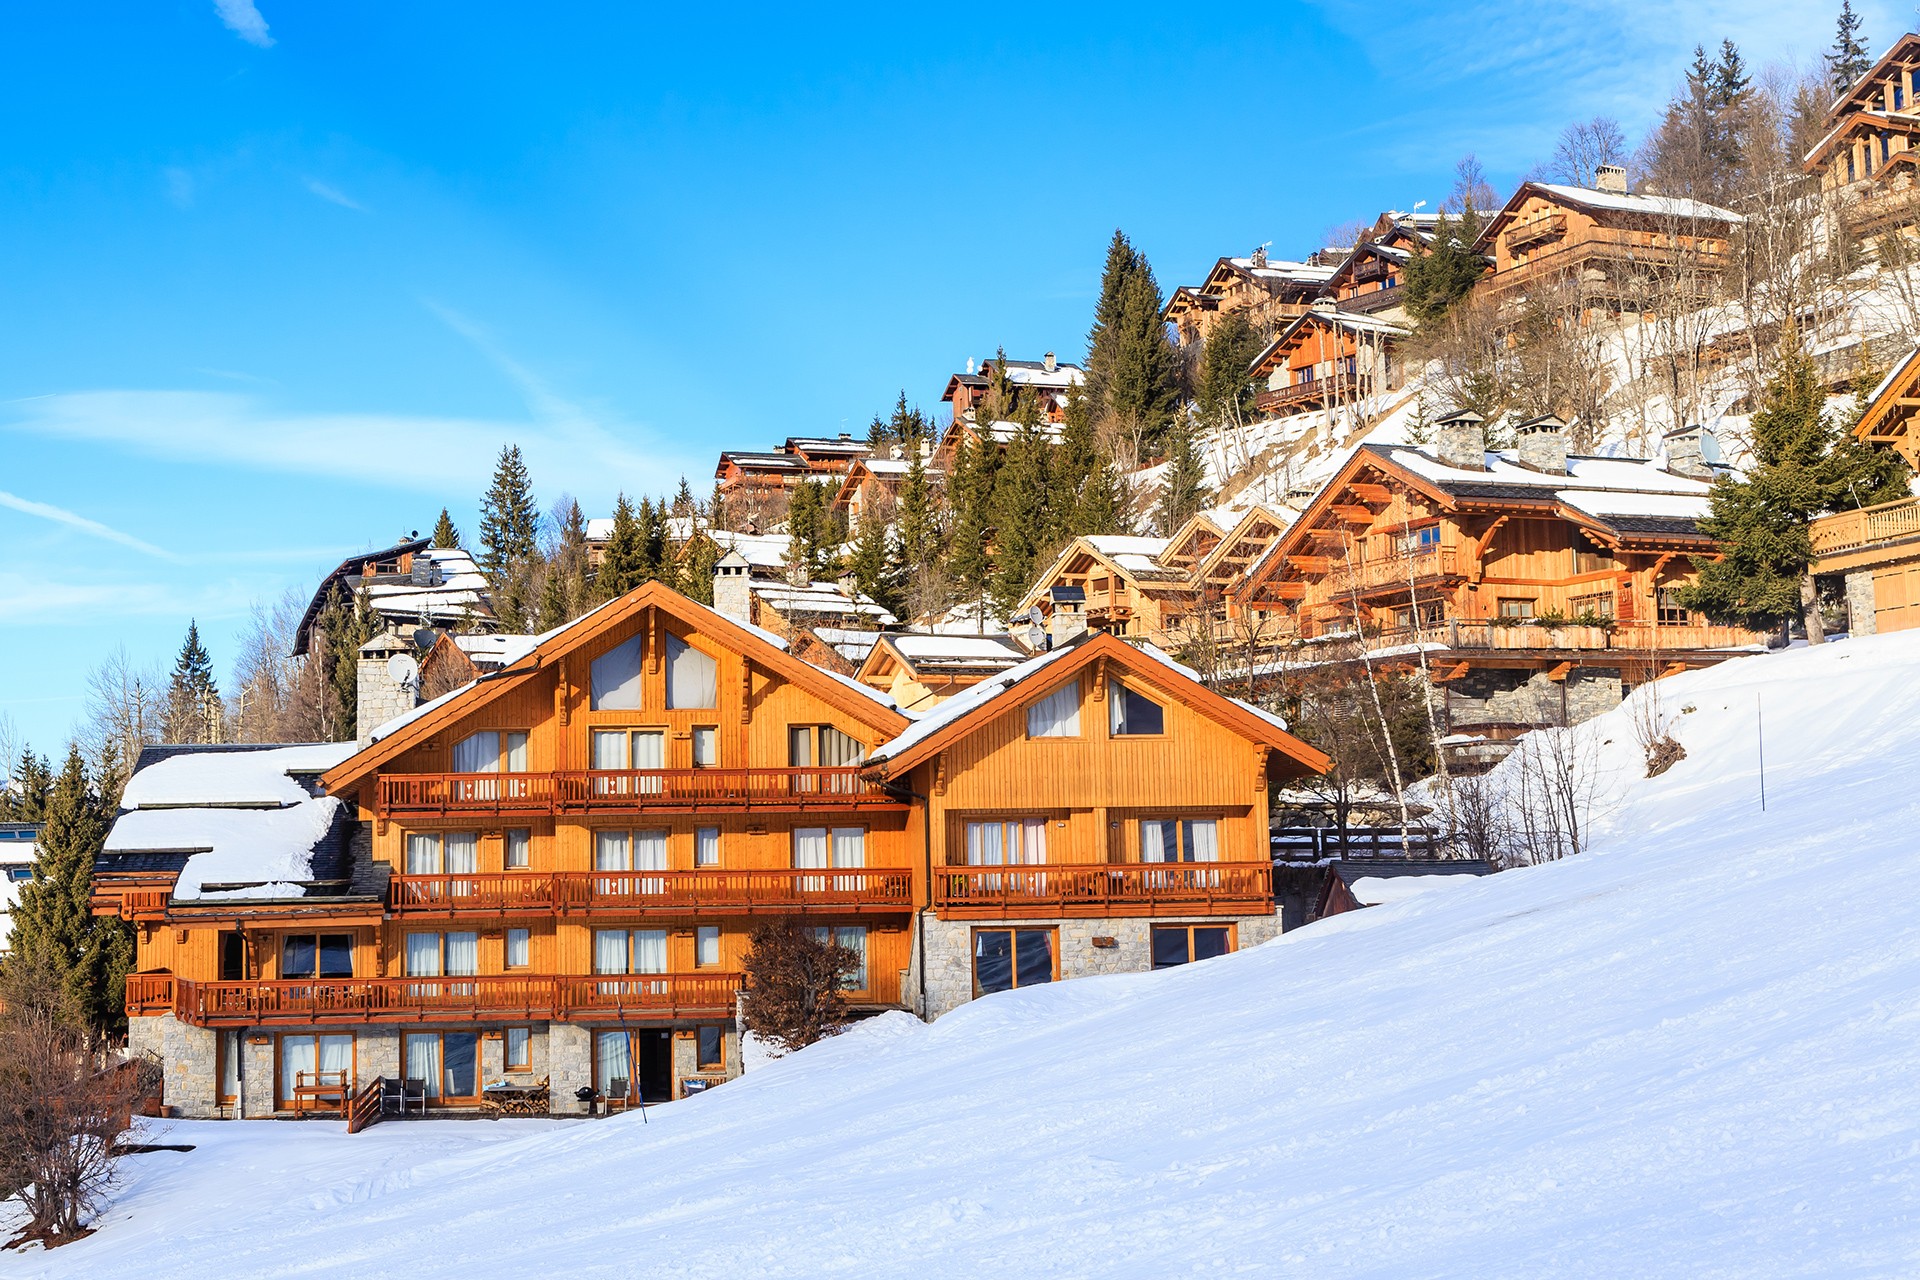 The UK's favourite ski resorts: Does yours make the cut? - OnTheSnow